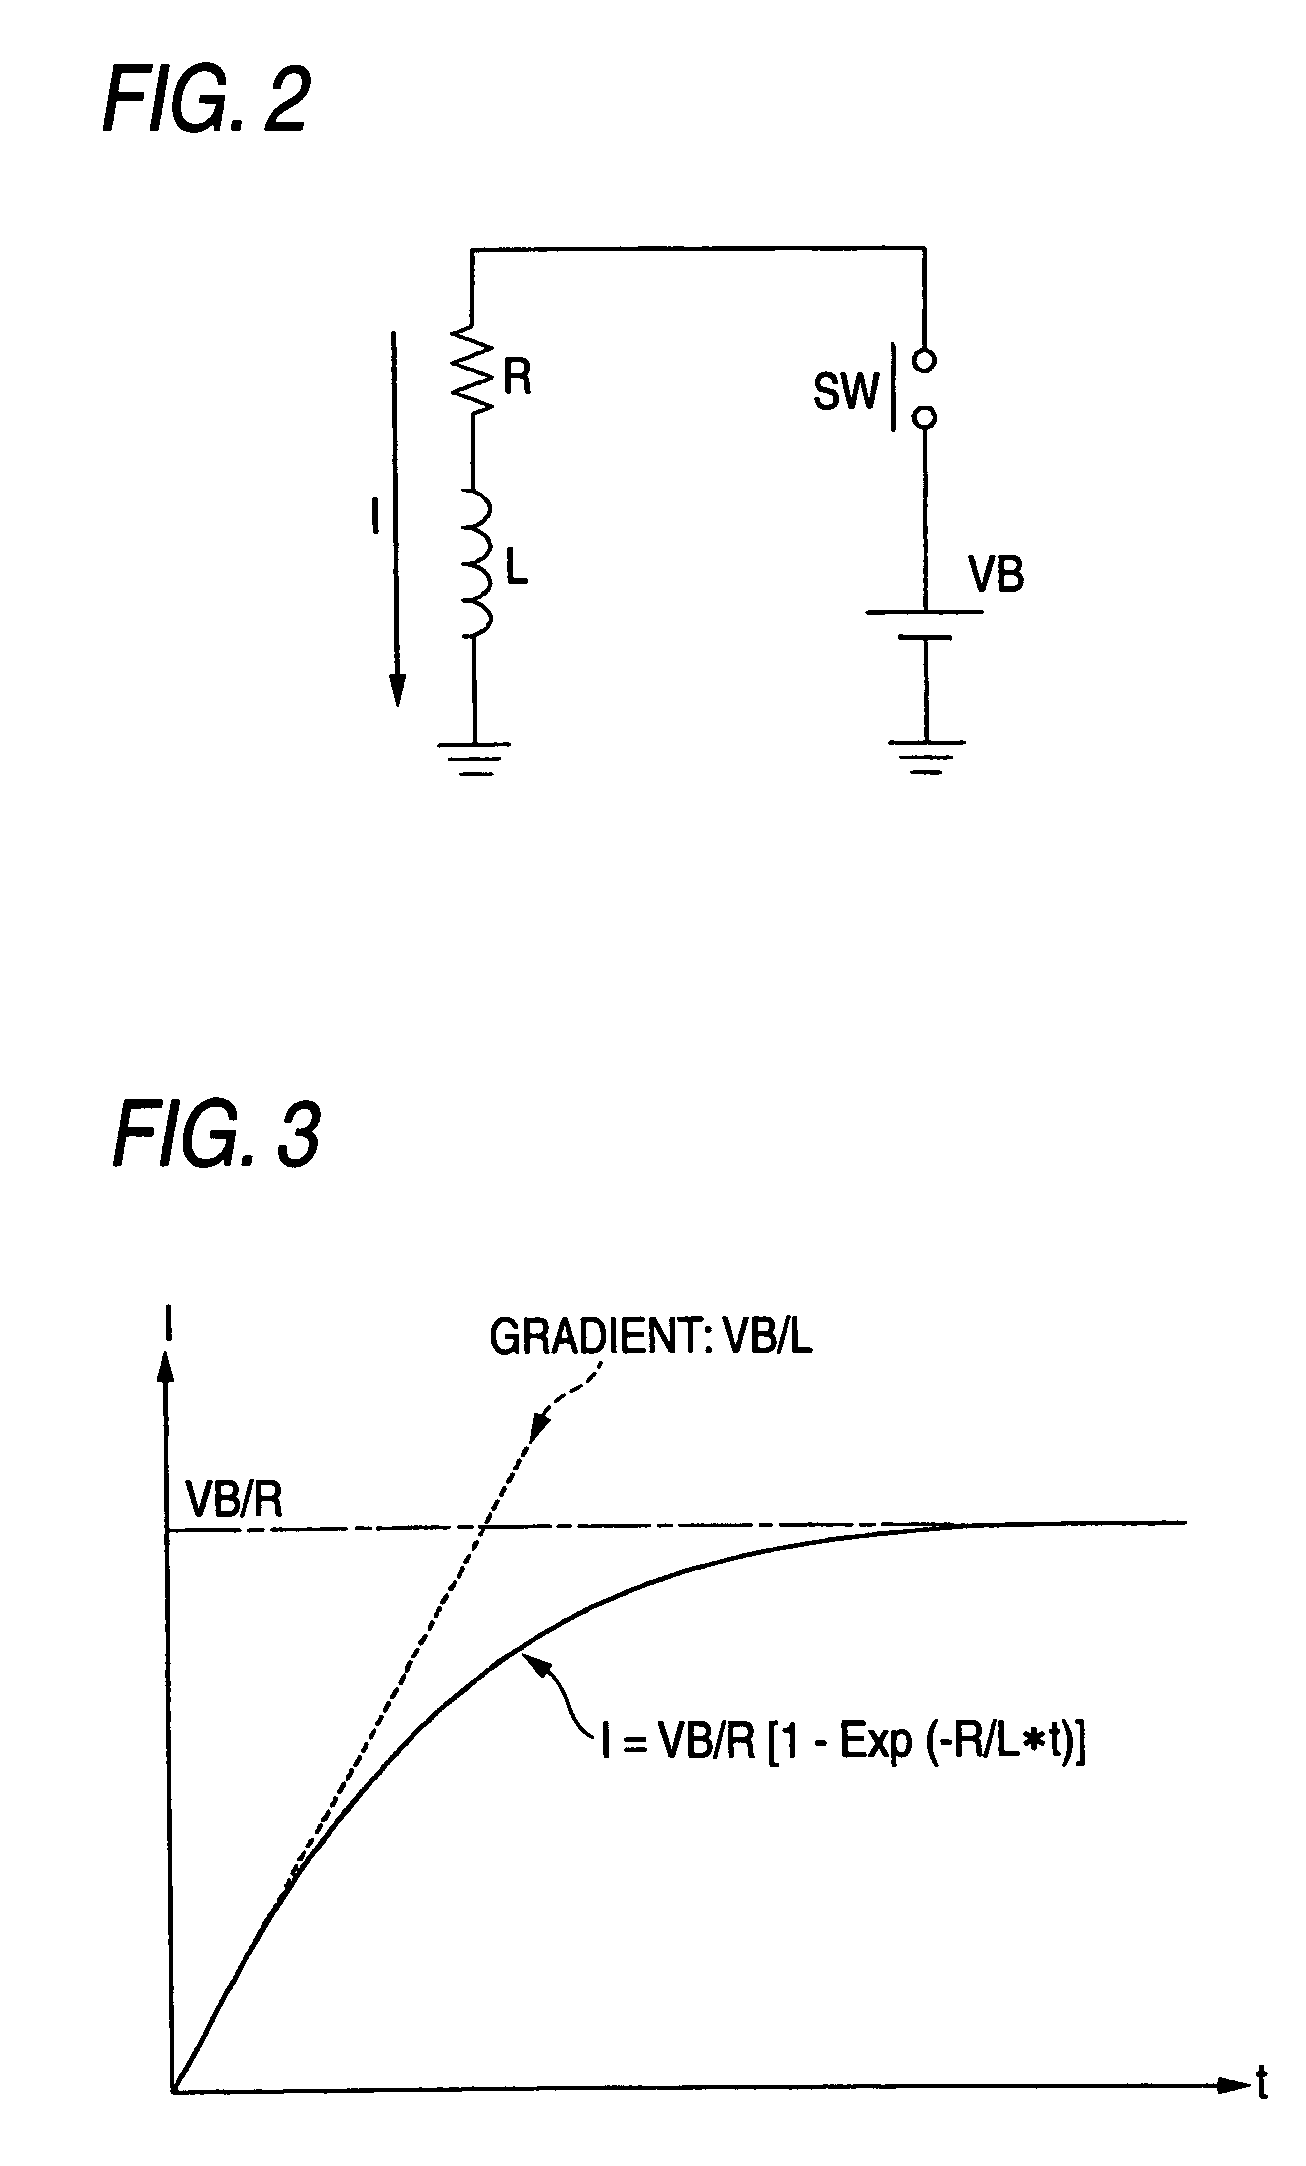 Control apparatus of semiconductor switch